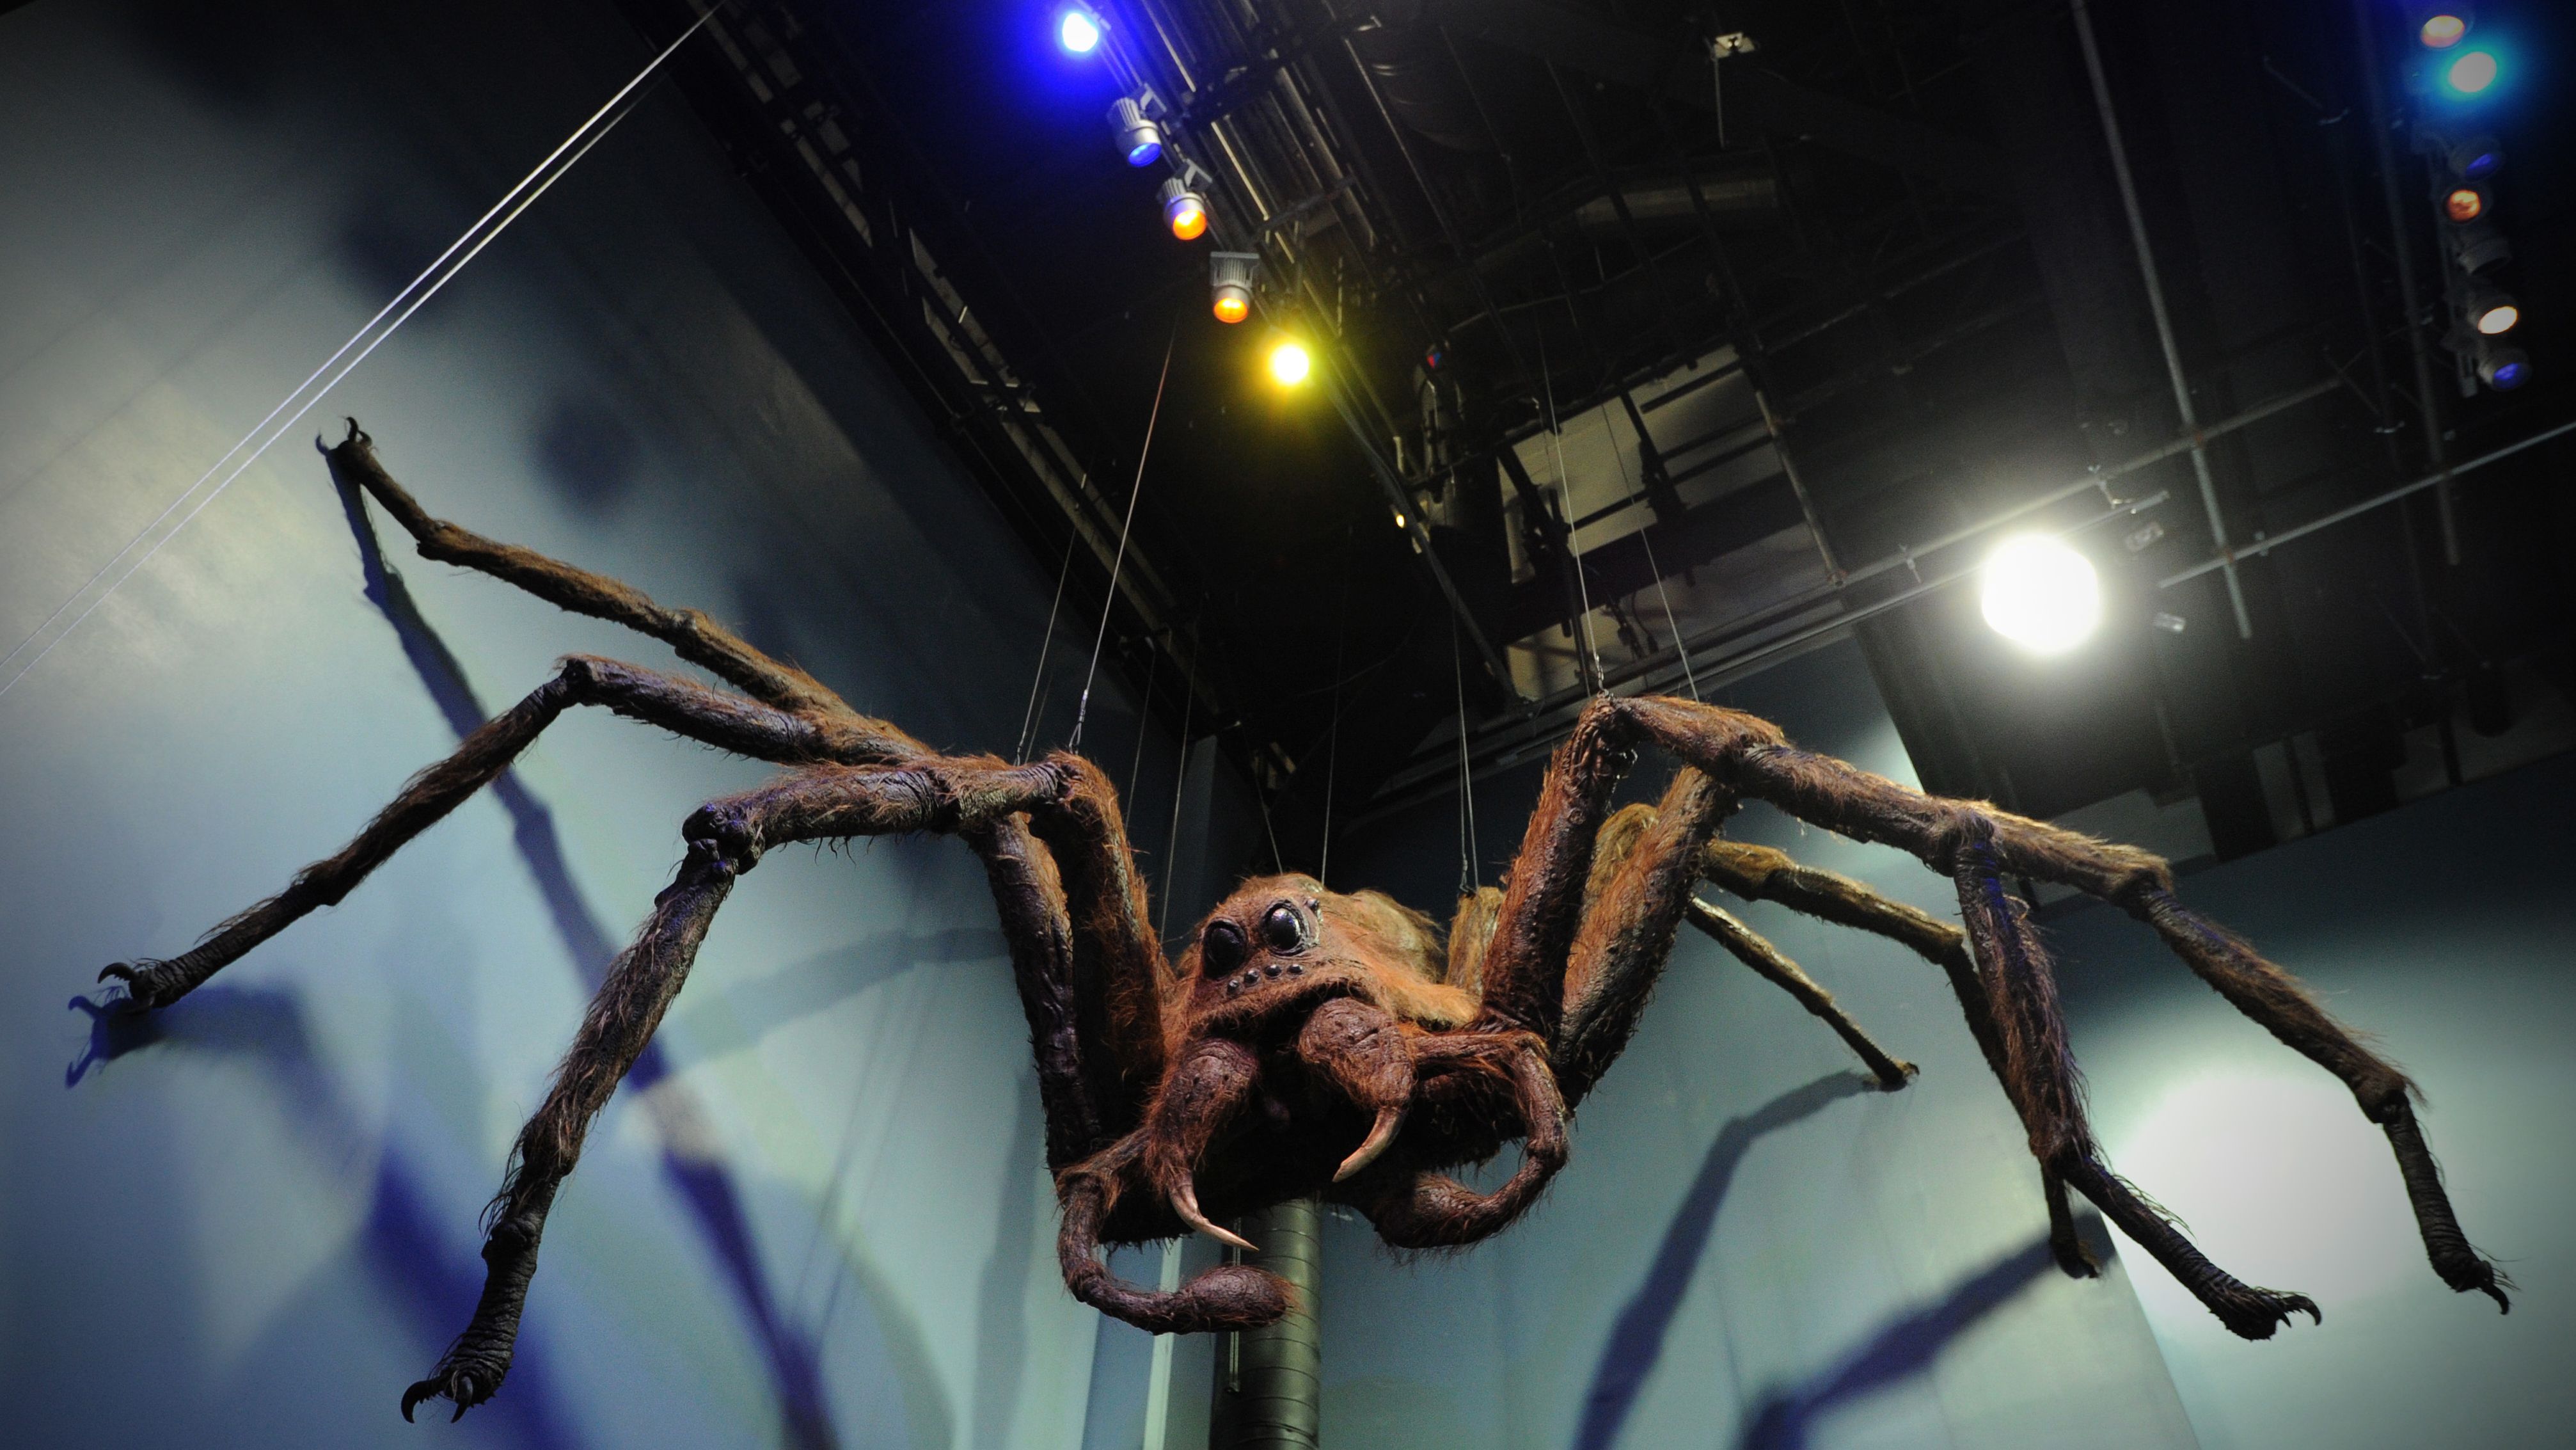  Aragog the giant spider greets visitors to a 2012 studio tour in north London.